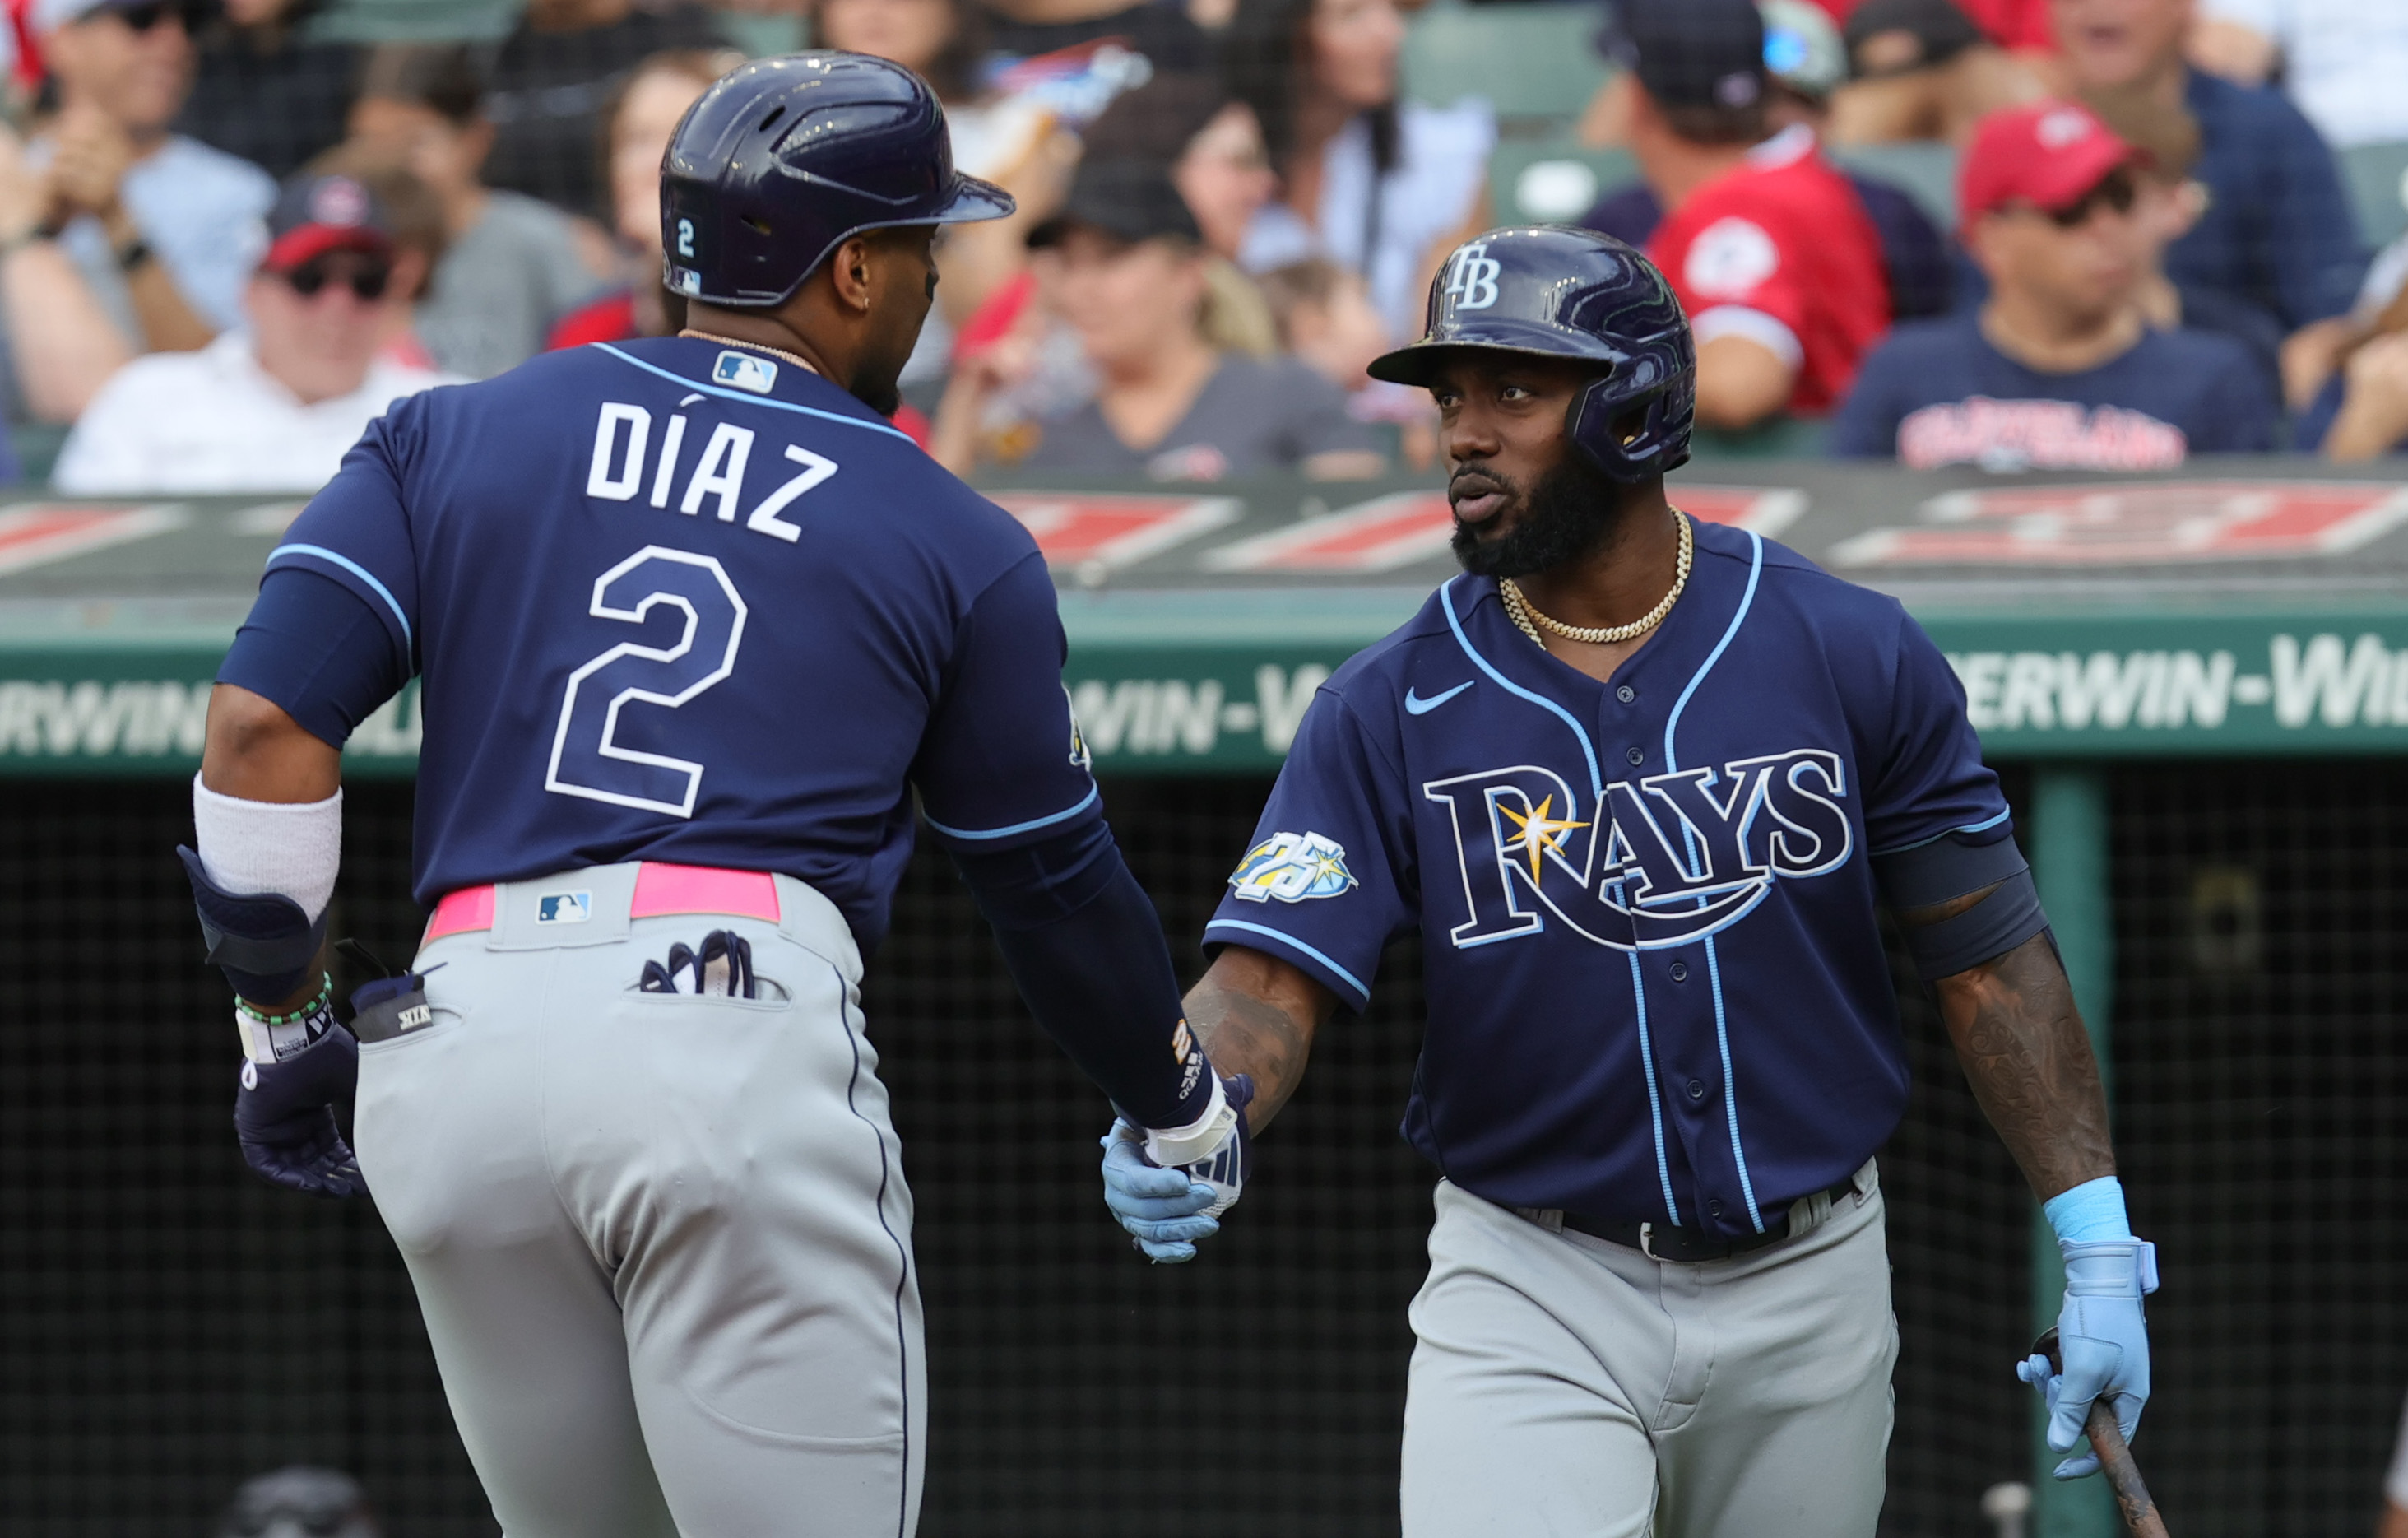 Tampa Bay Rays left fielder Randy Arozarena congratulates Rays first baseman Yandy Diaz after a solo homer